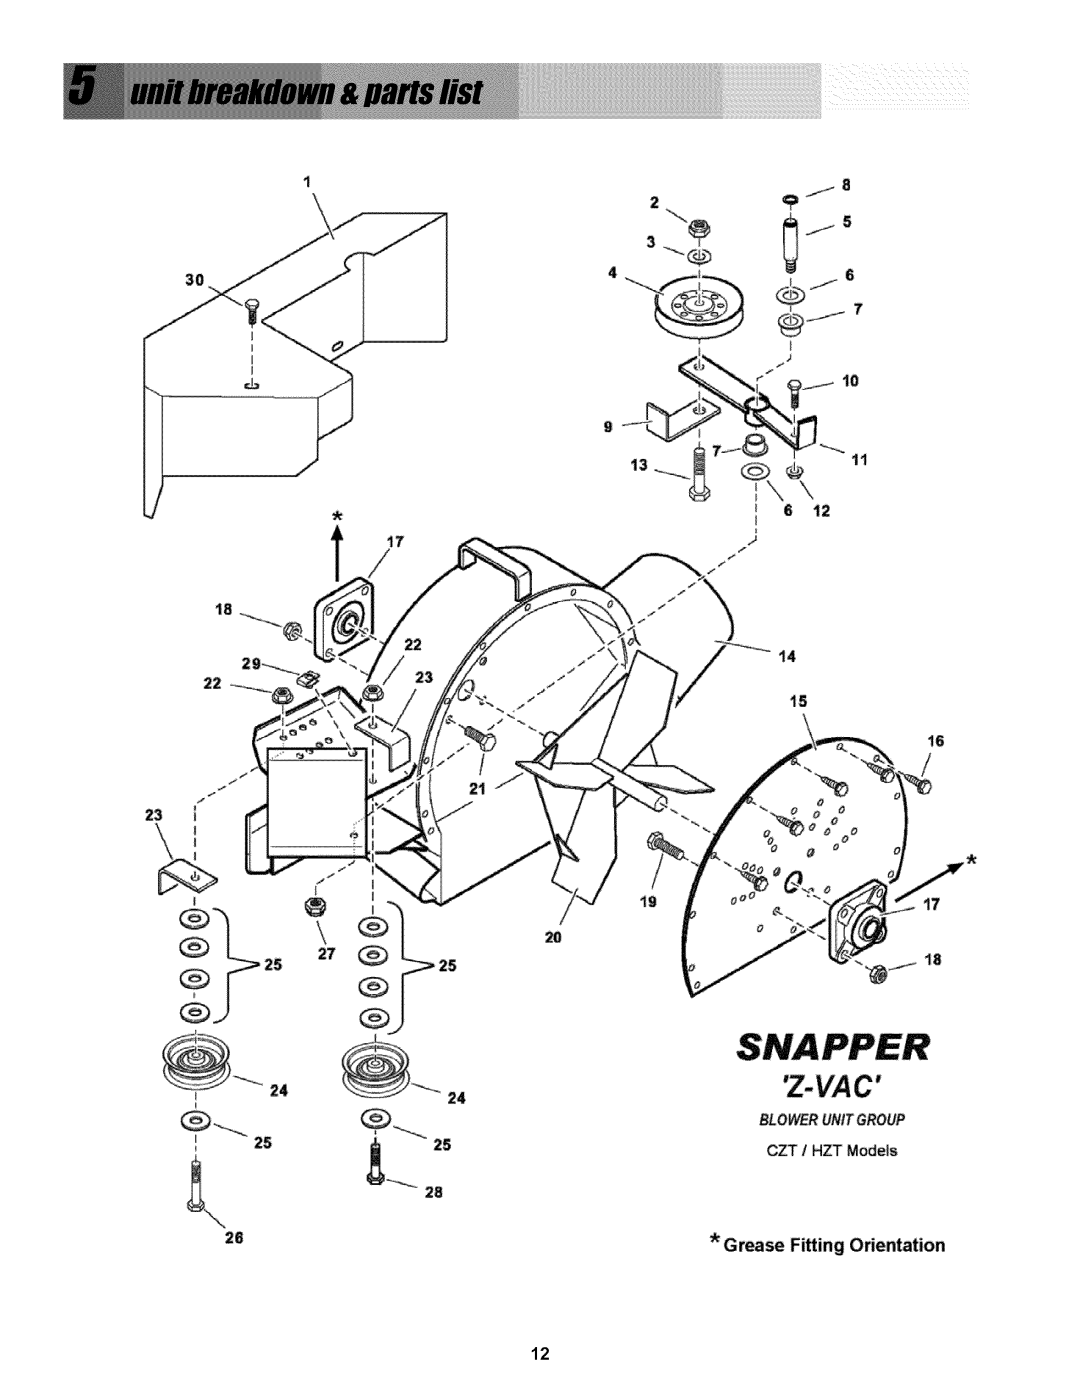 Snapper P/N 7078273, 0-50576 manual Grease Fitting Orientation, CZT / HZT Models, Blop Erunit Group 